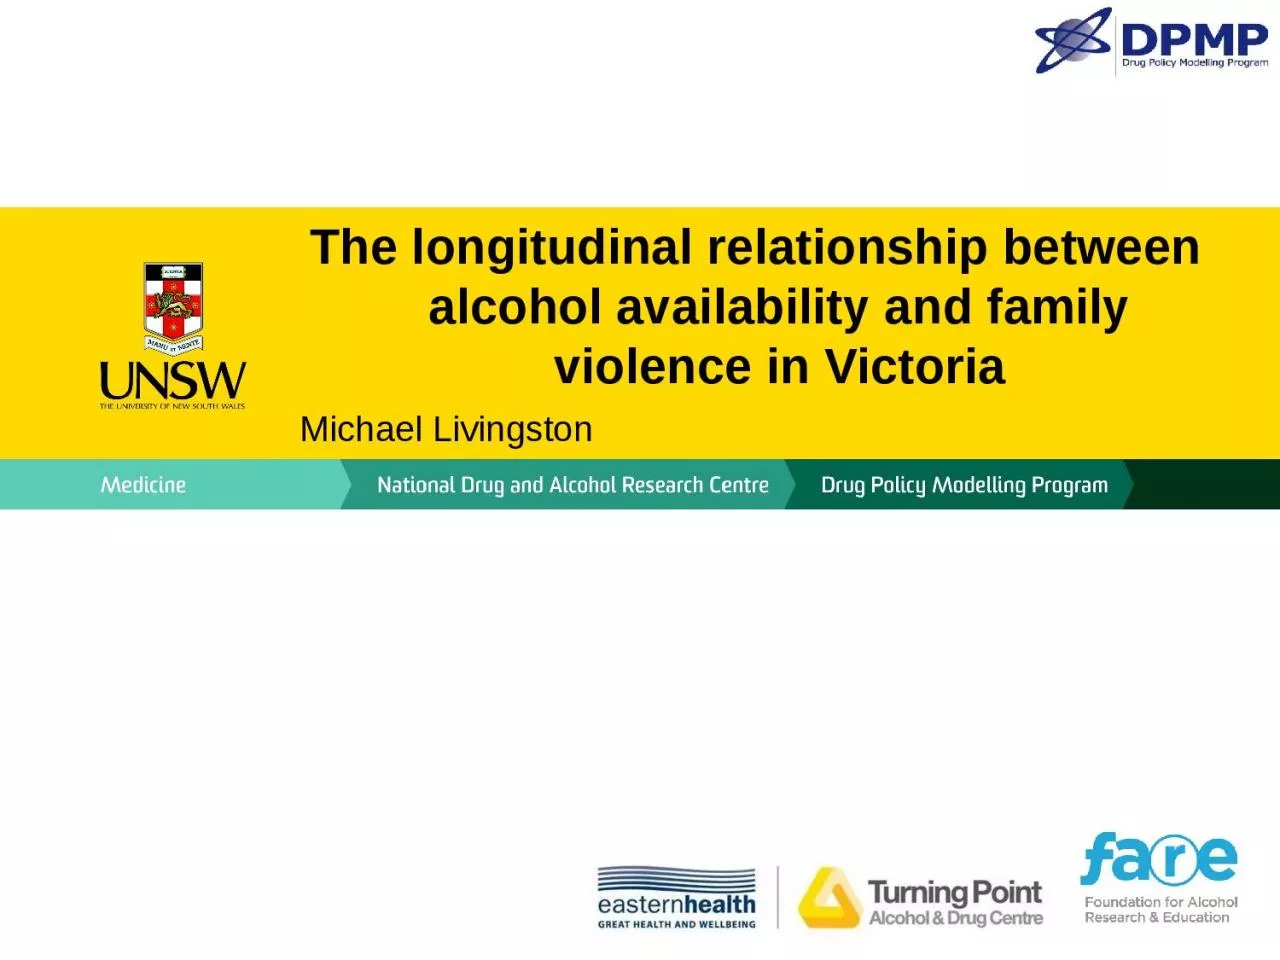 The longitudinal relationship between alcohol availability and family violence in Victoria